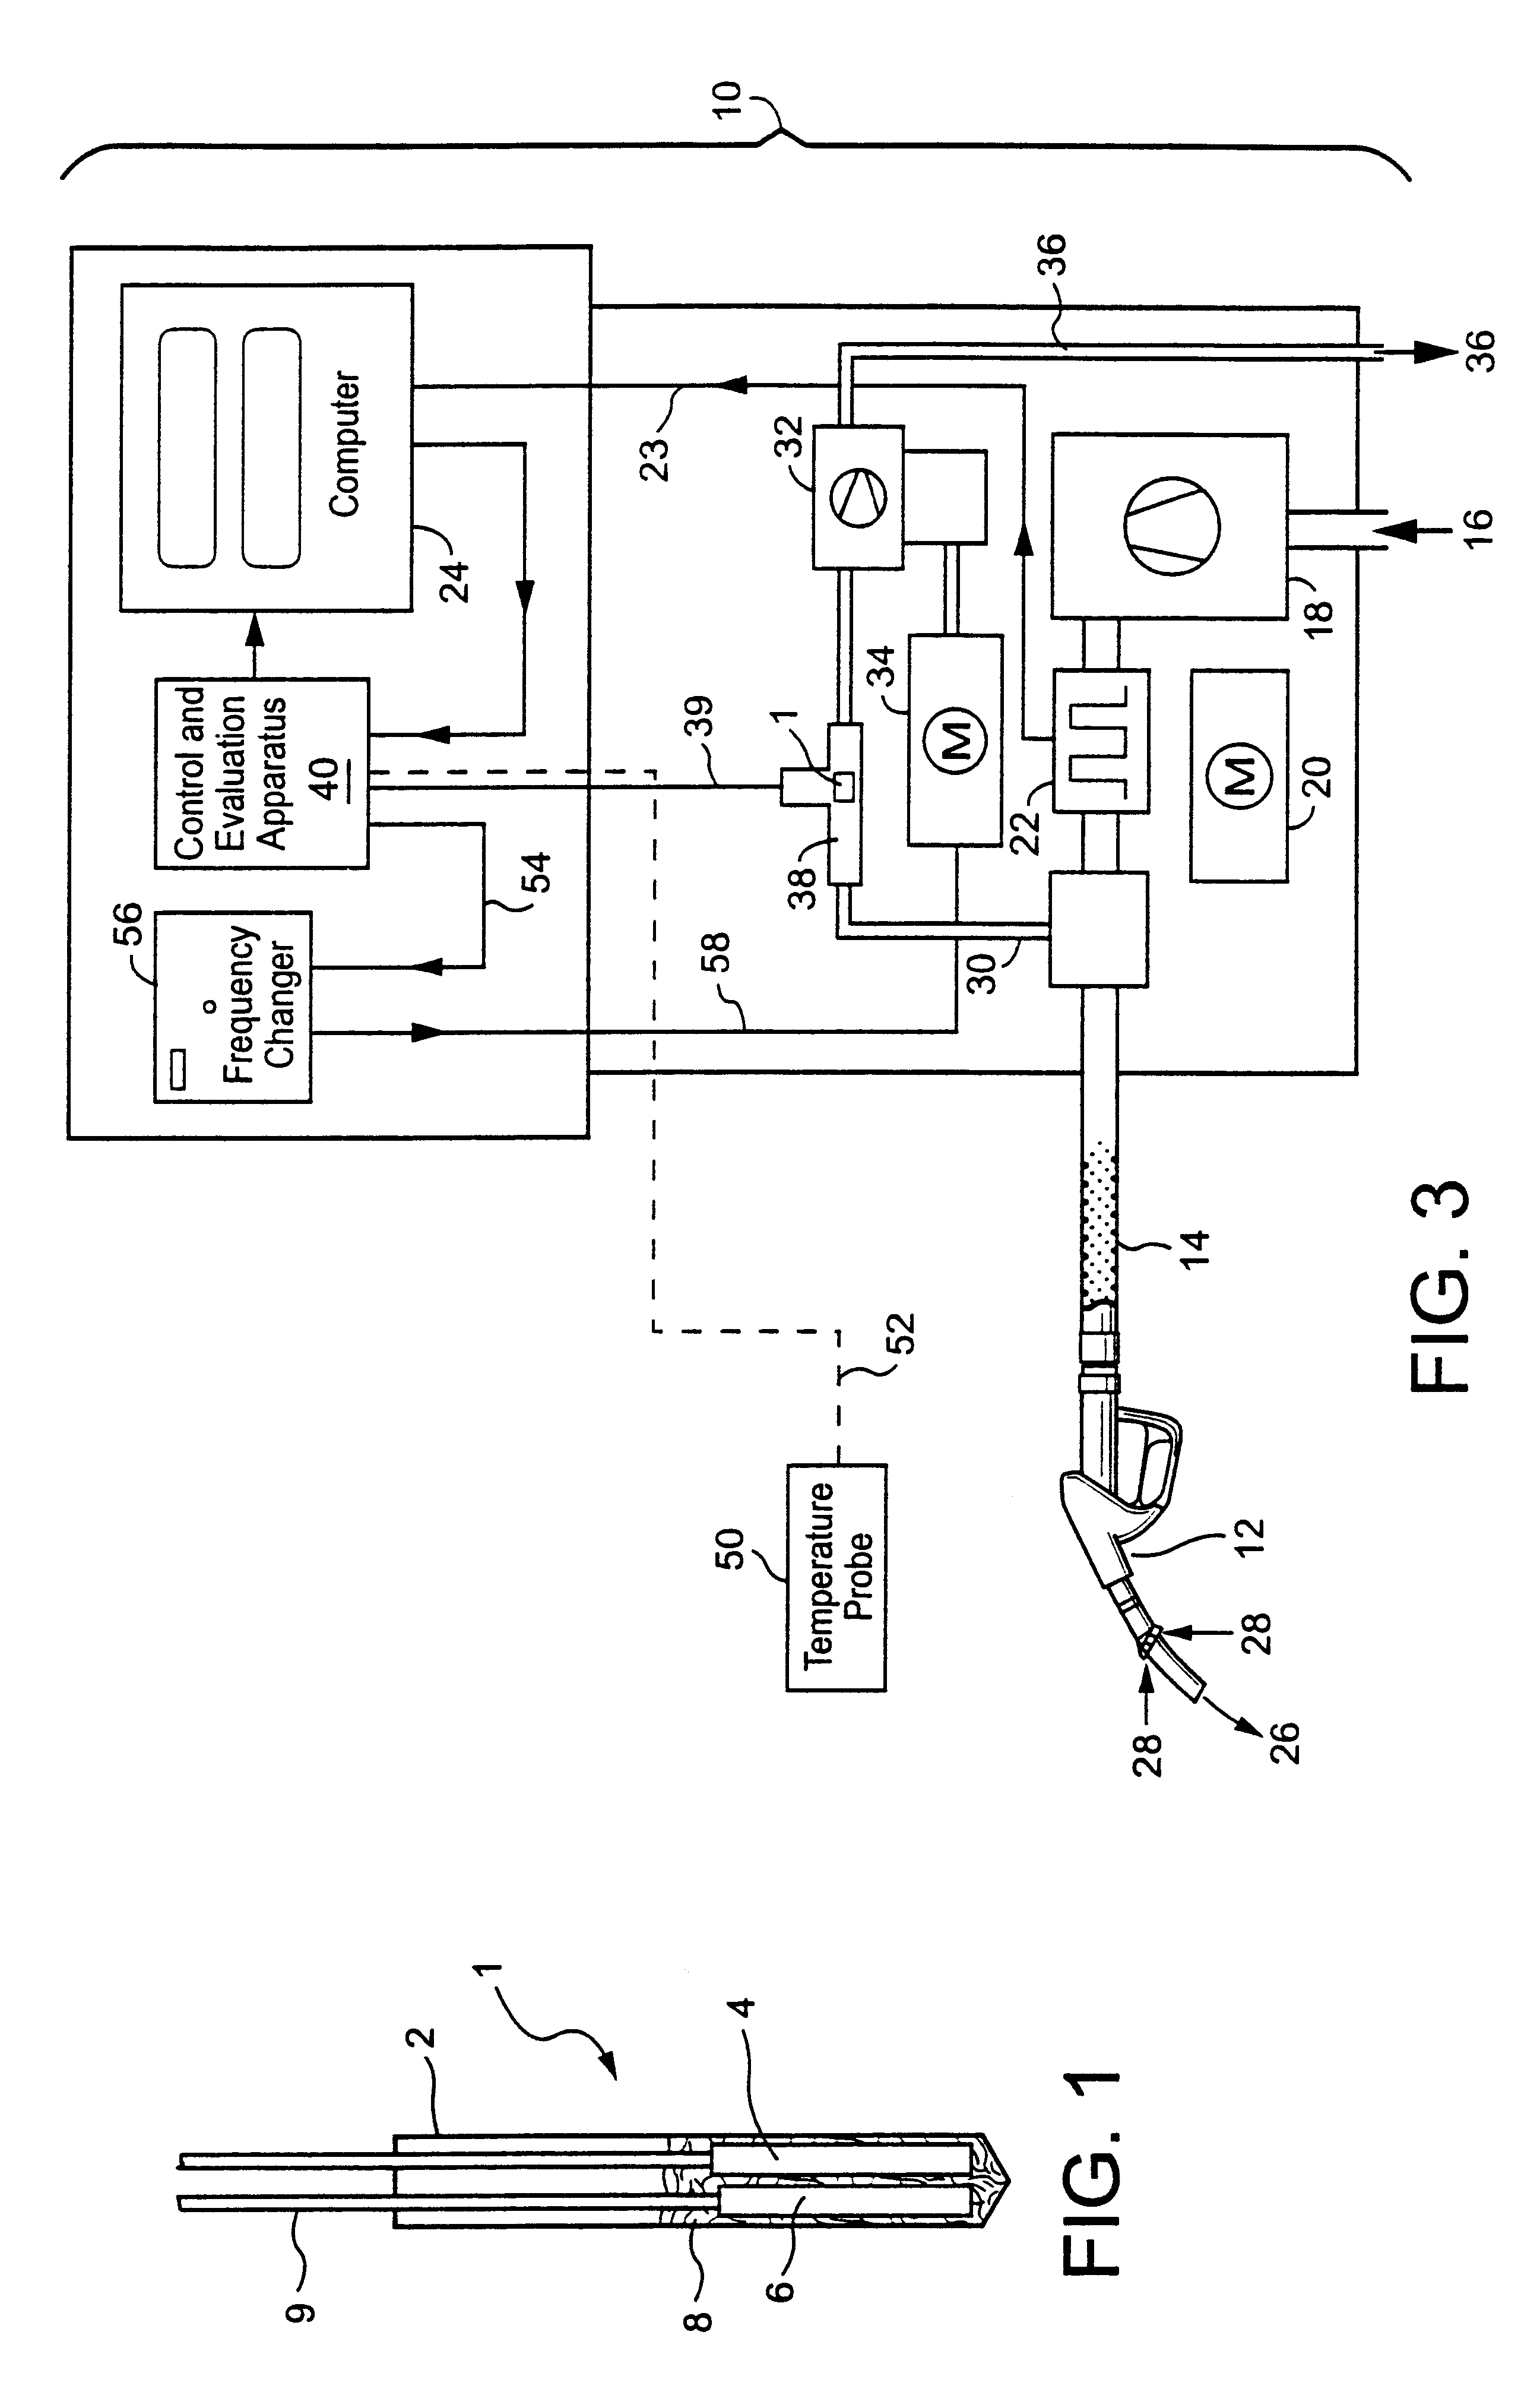 Method of determining the throughflow of a gas mixture